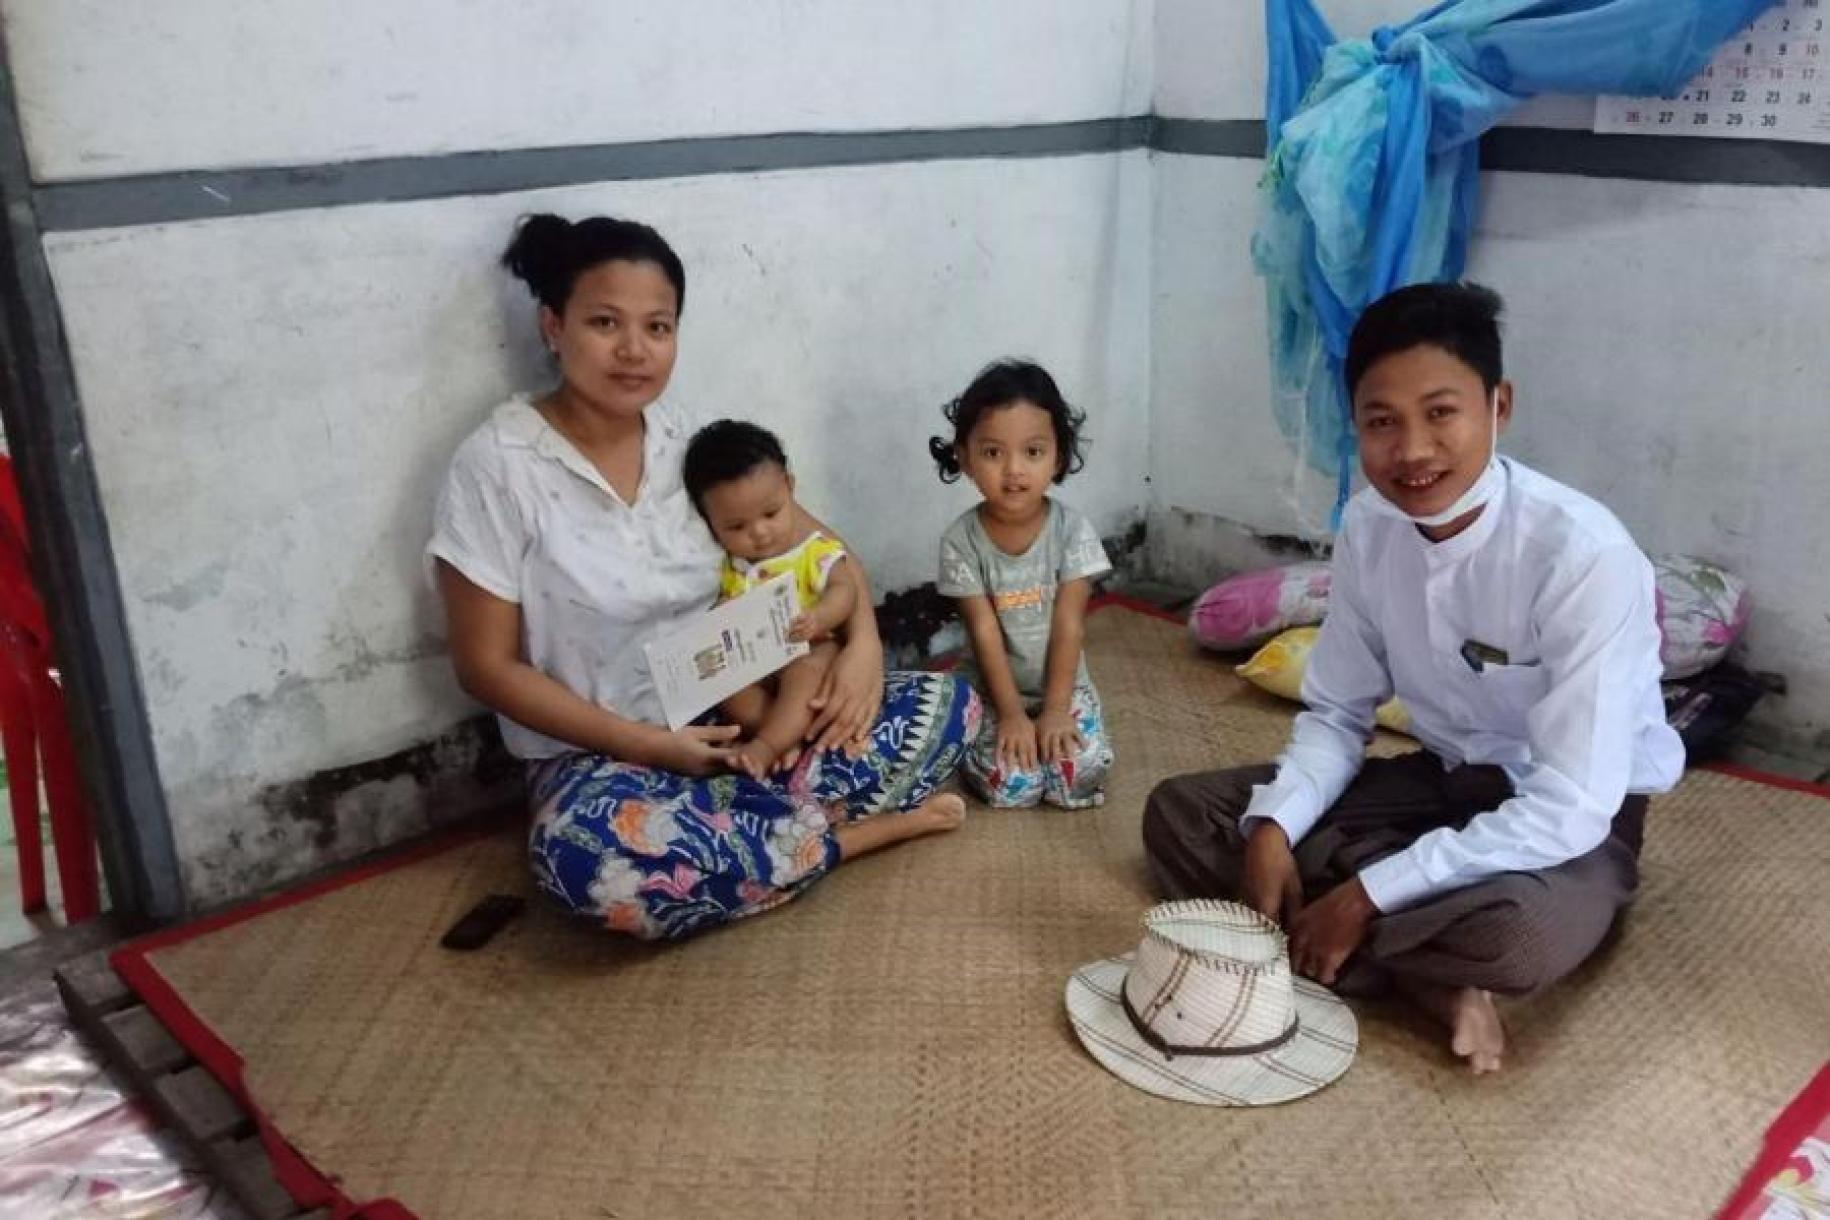 A woman sits with her children and husband on the floor of their residence.